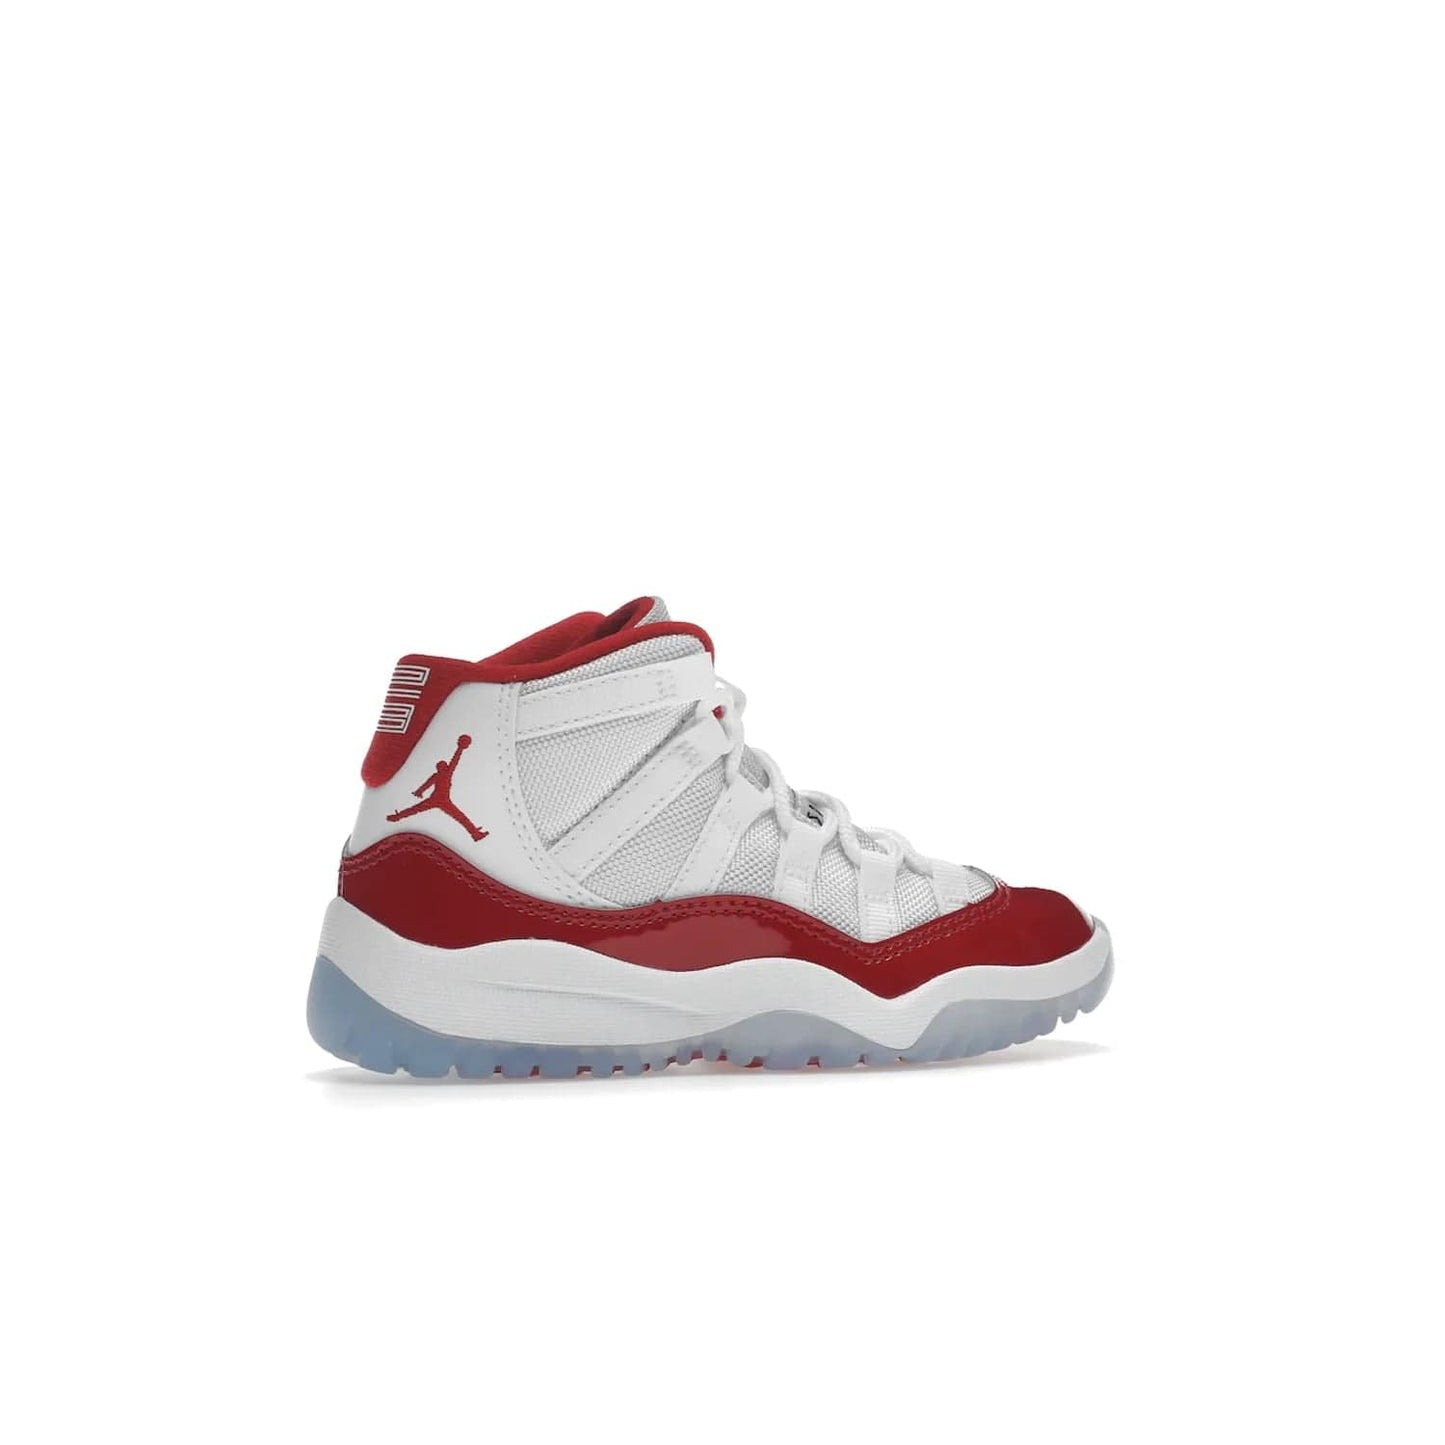 Jordan 11 Retro Cherry (2022) (PS) - Image 35 - Only at www.BallersClubKickz.com - An iconic silhouette with a timeless look, the Air Jordan 11 Retro Cherry 2022 PS features a crisp White, Varsity Red and Black colorway. The upper is made of ballistic mesh, a red patent leather mudguard, '23' branding and white Phylon midsole. Get optimal cushioning and comfort on December 10th, 2022. Don't miss out.